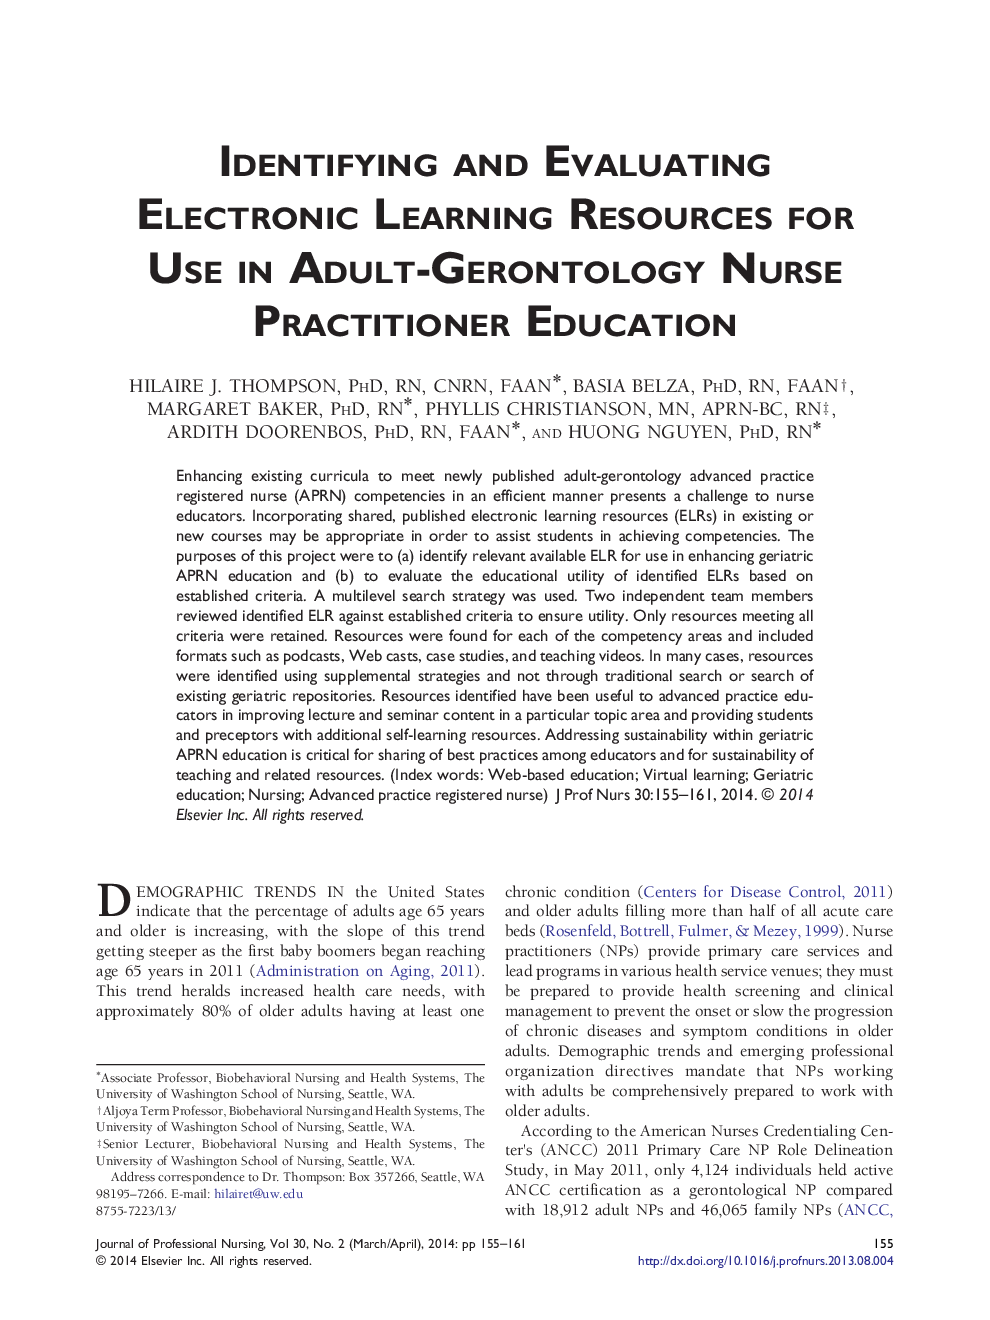 Identifying and Evaluating Electronic Learning Resources for Use in Adult-Gerontology Nurse Practitioner Education